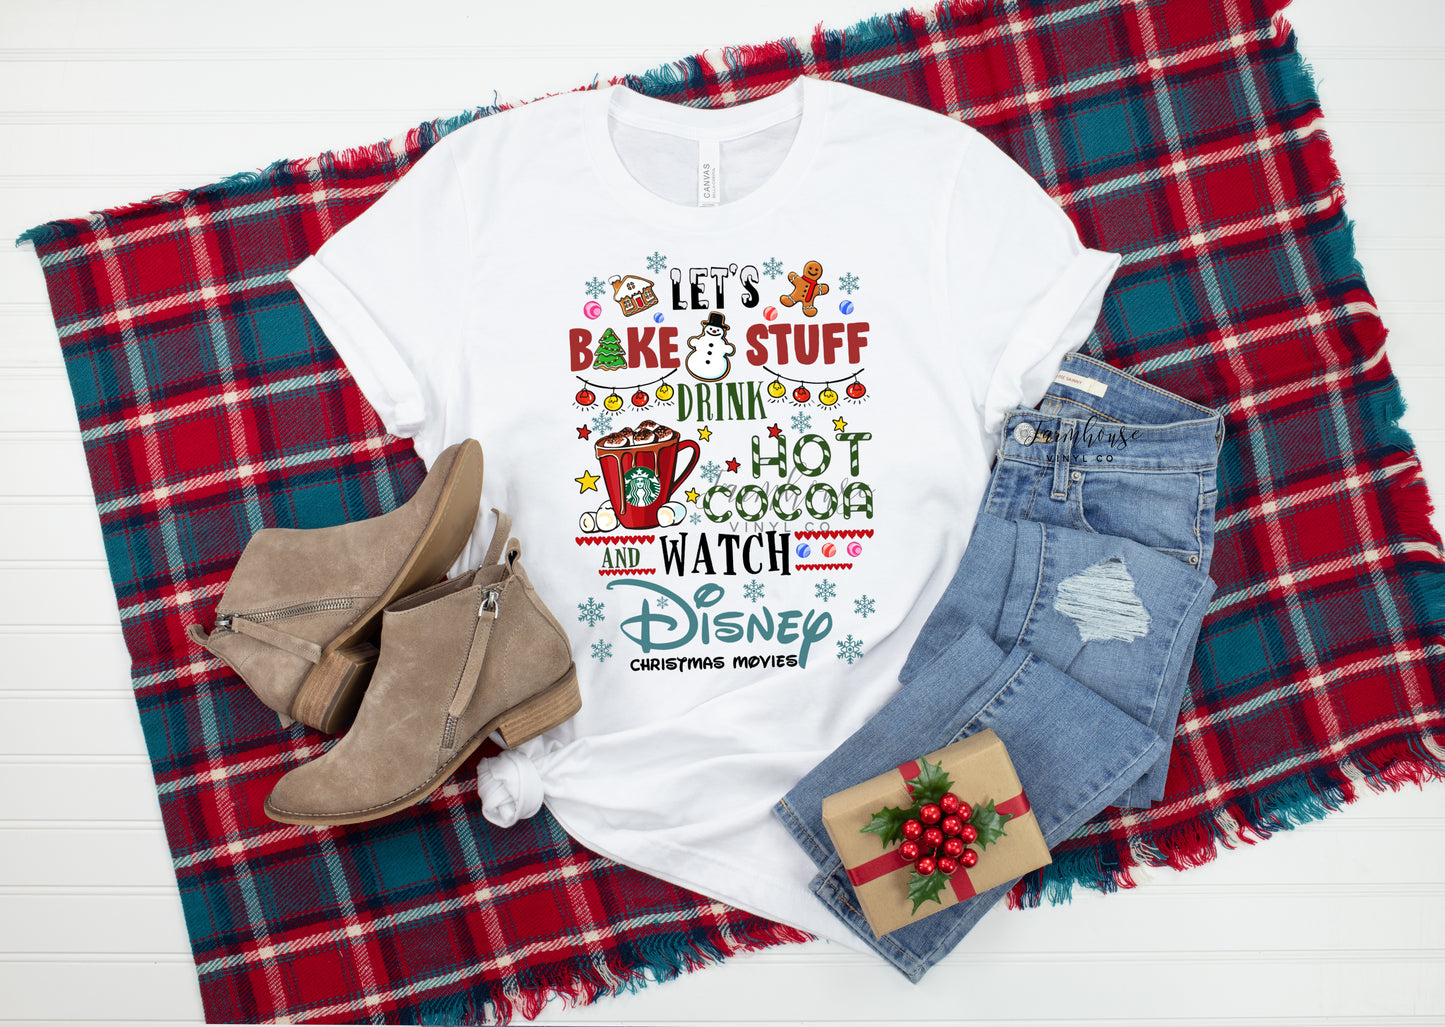 Let's Bake Stuff Drink Hot Cocoa and Watch Disney Christmas Movies Shirt Collection - Farmhouse Vinyl Co